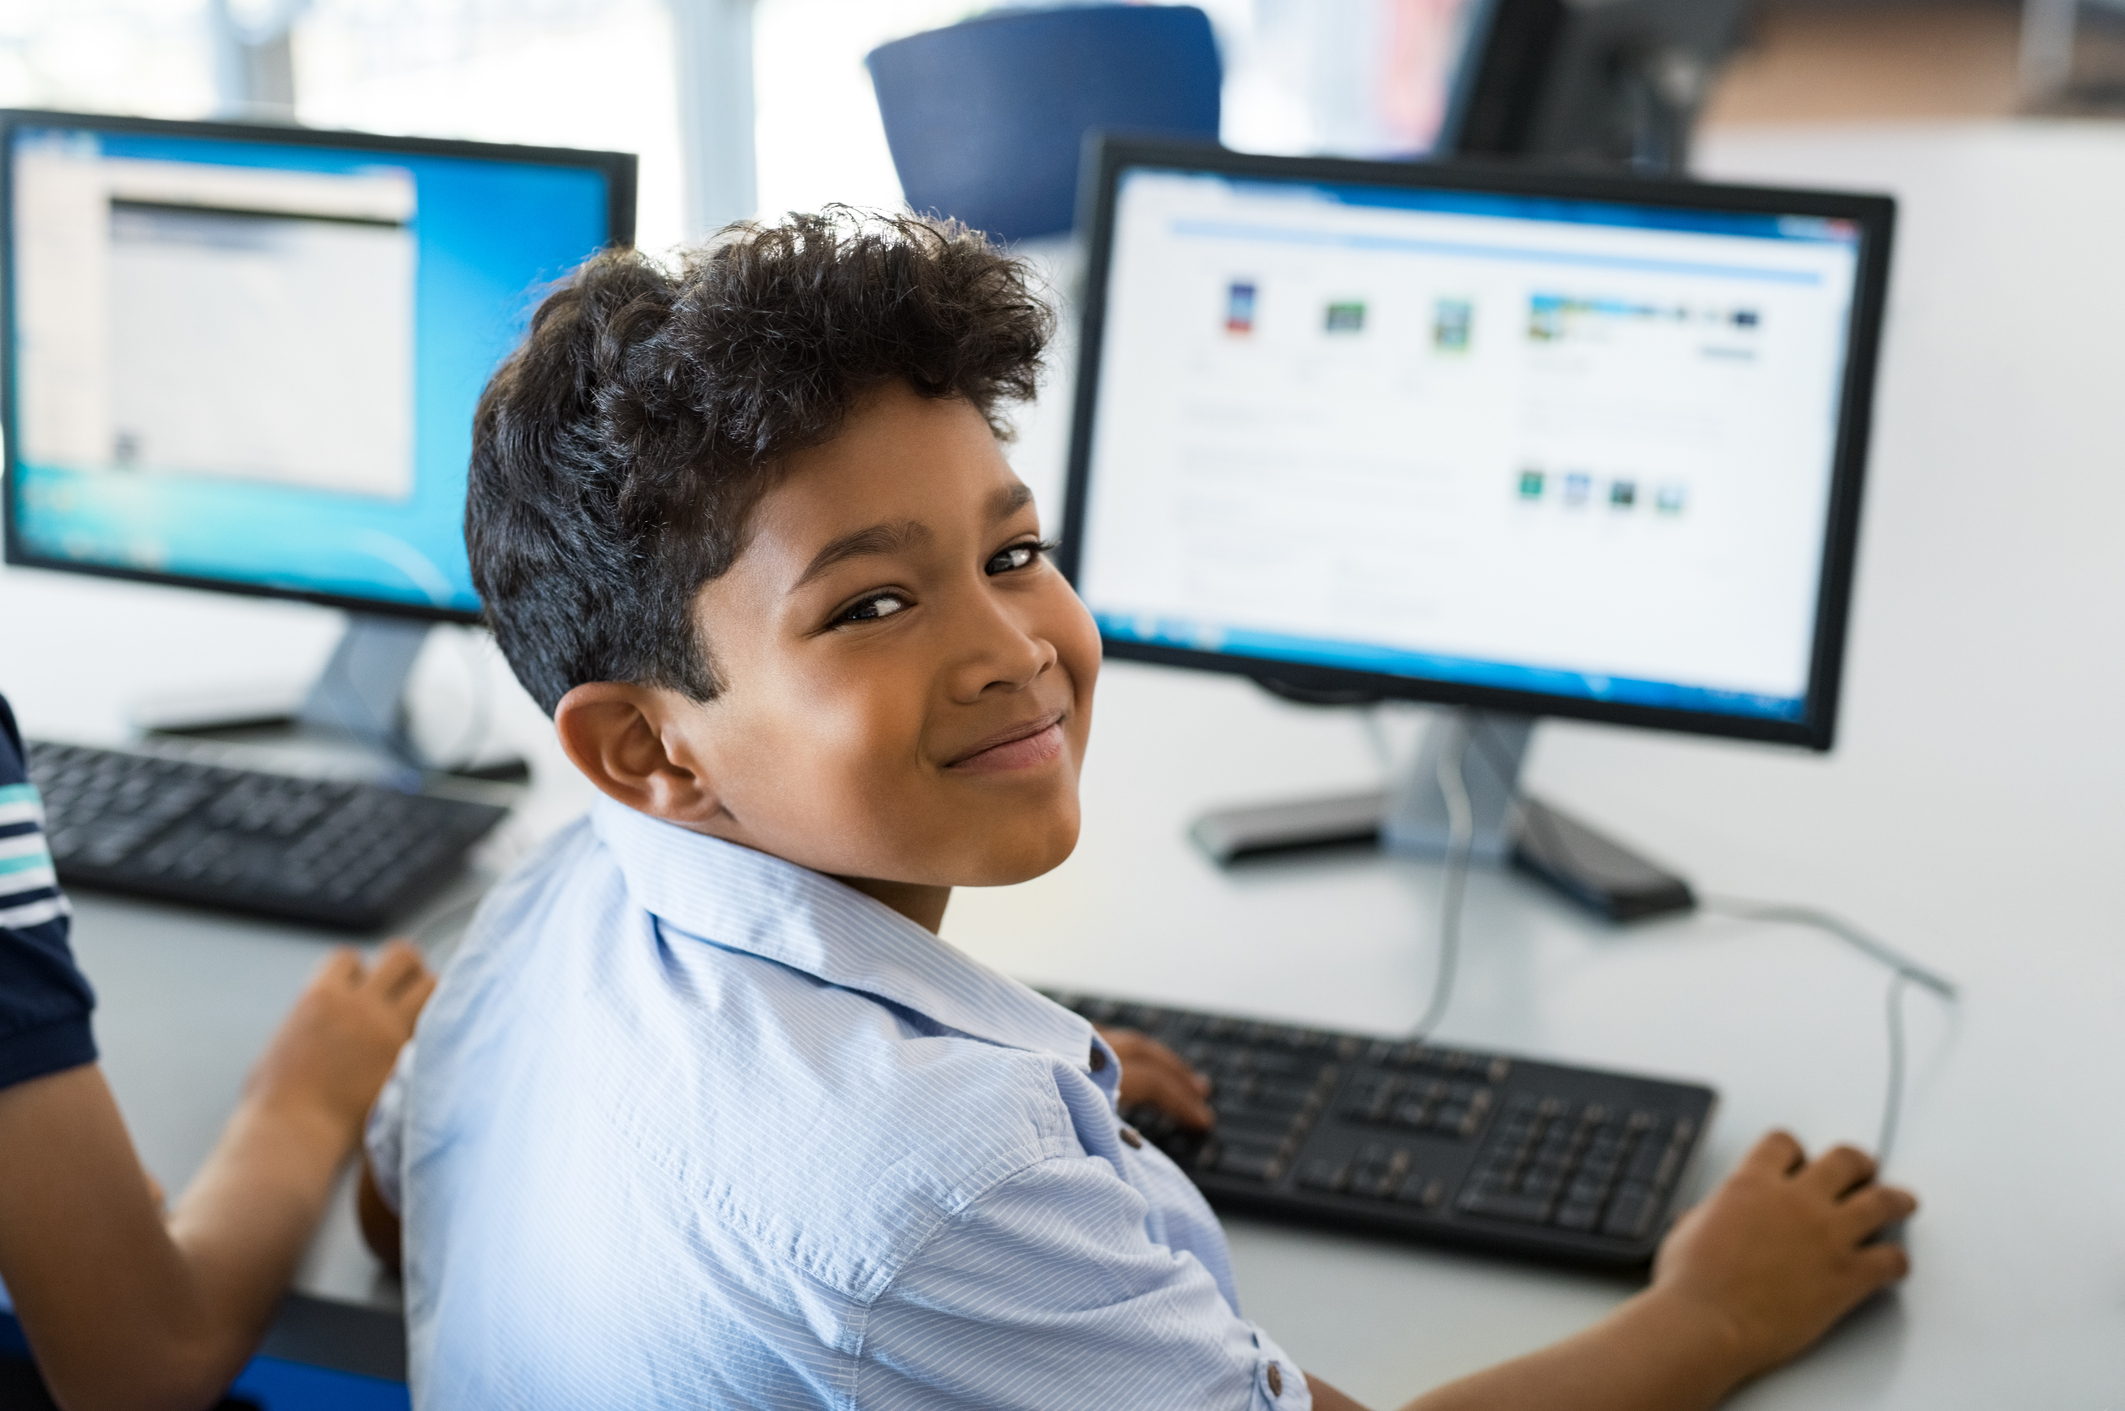 building healthy technology habits in kids